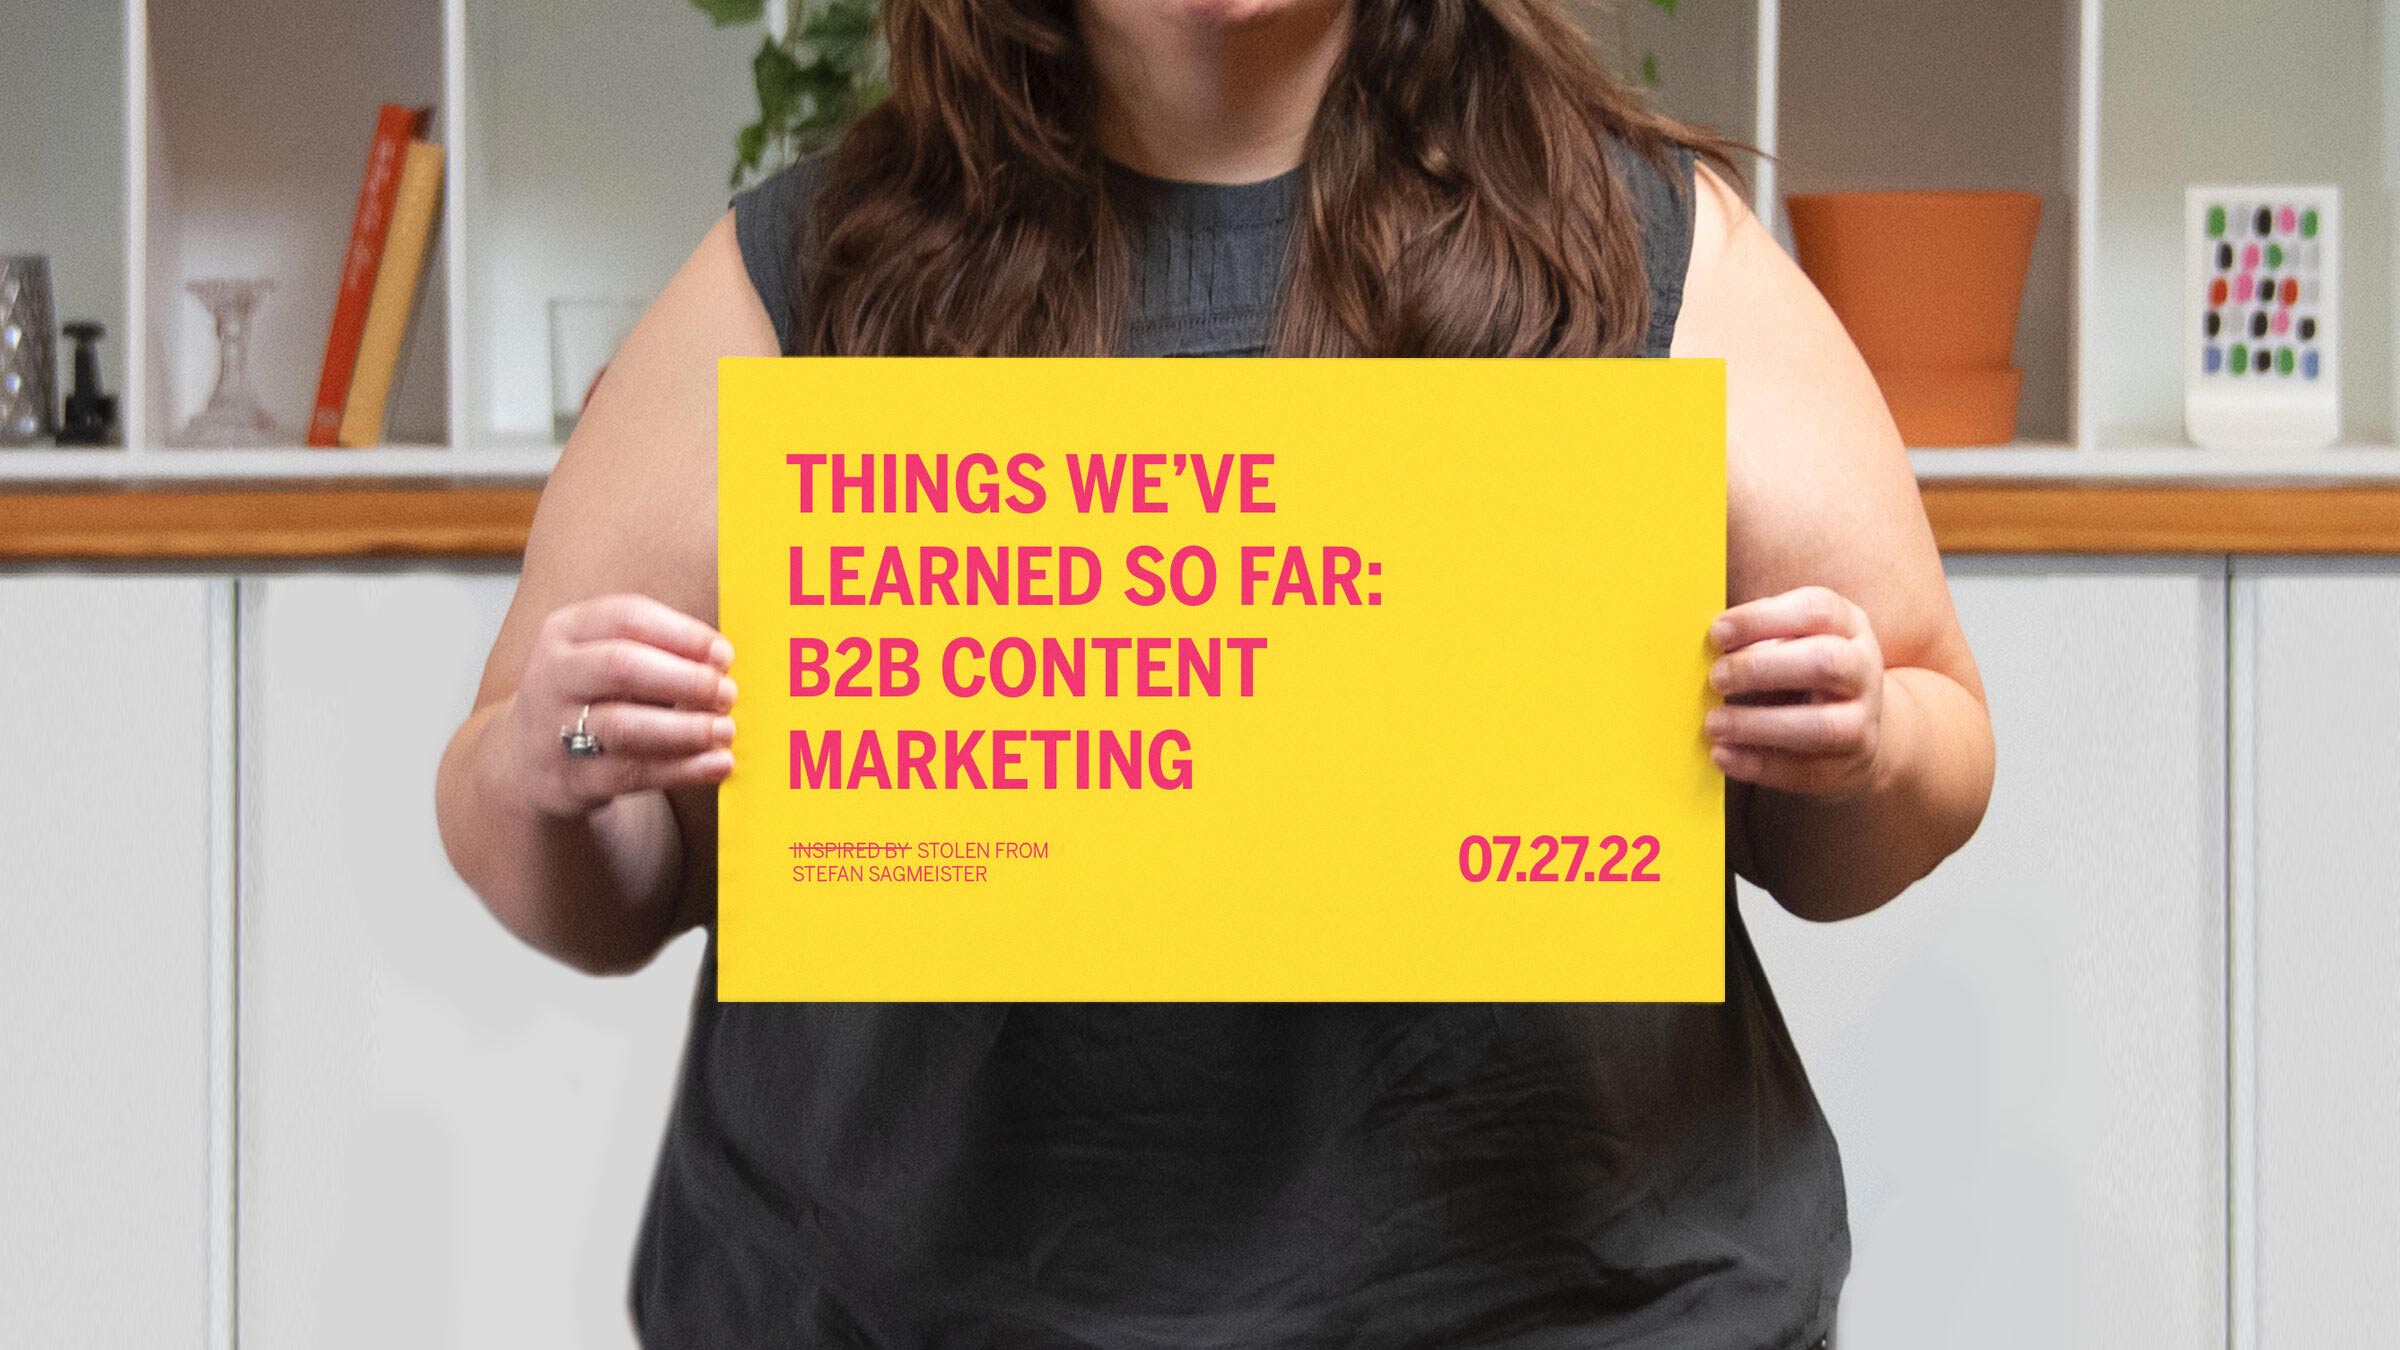 Blaise Hart-Schmidt, Senior Marketing Manager, will present Things We've Learned: B2B Content Marketing